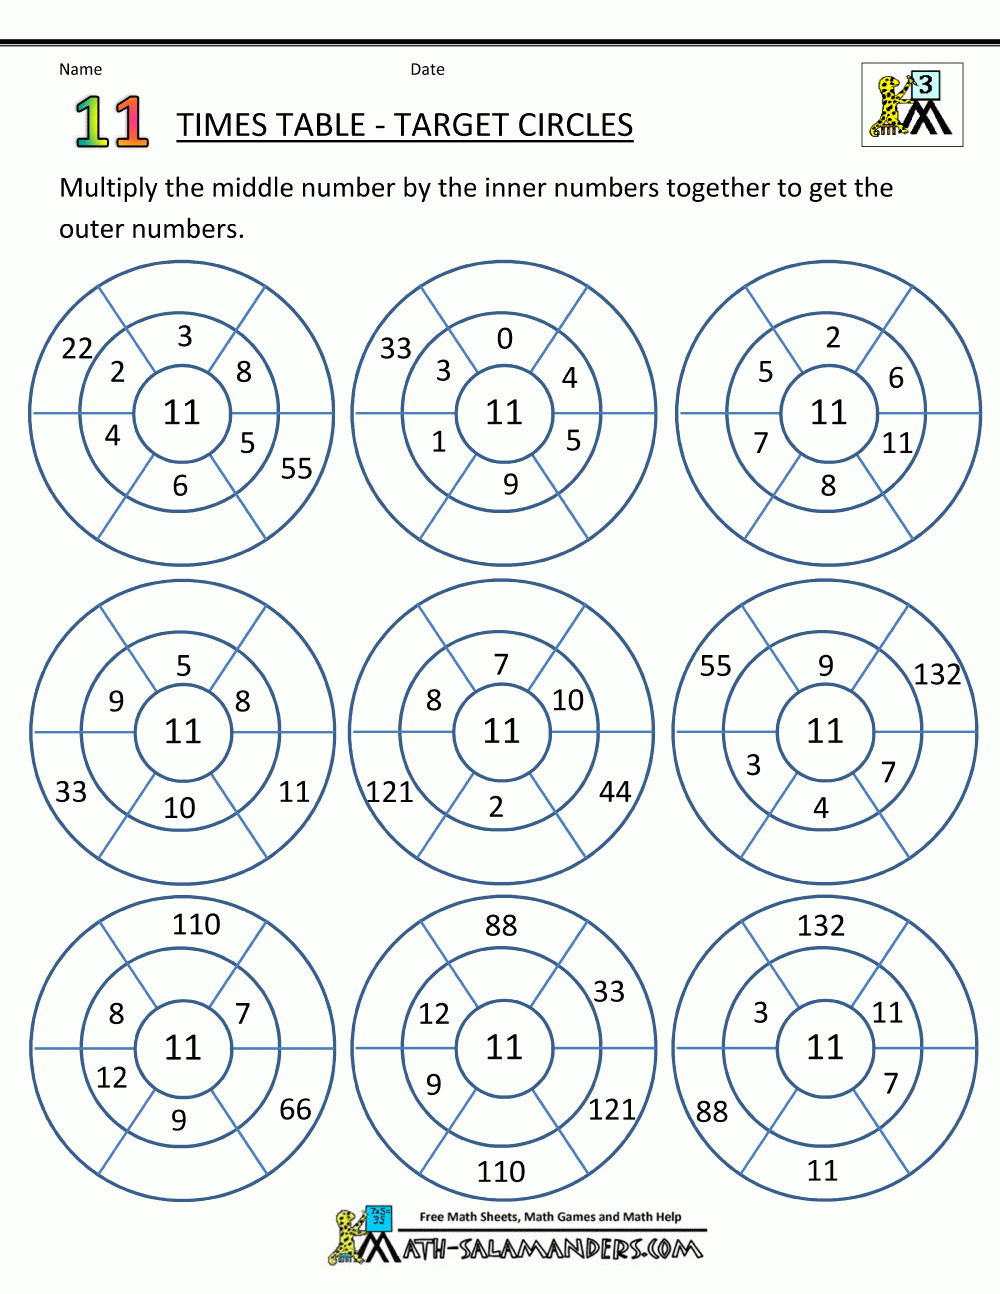 Times-Table-Worksheets-11-Times-Table-Circles-1.gif (1000